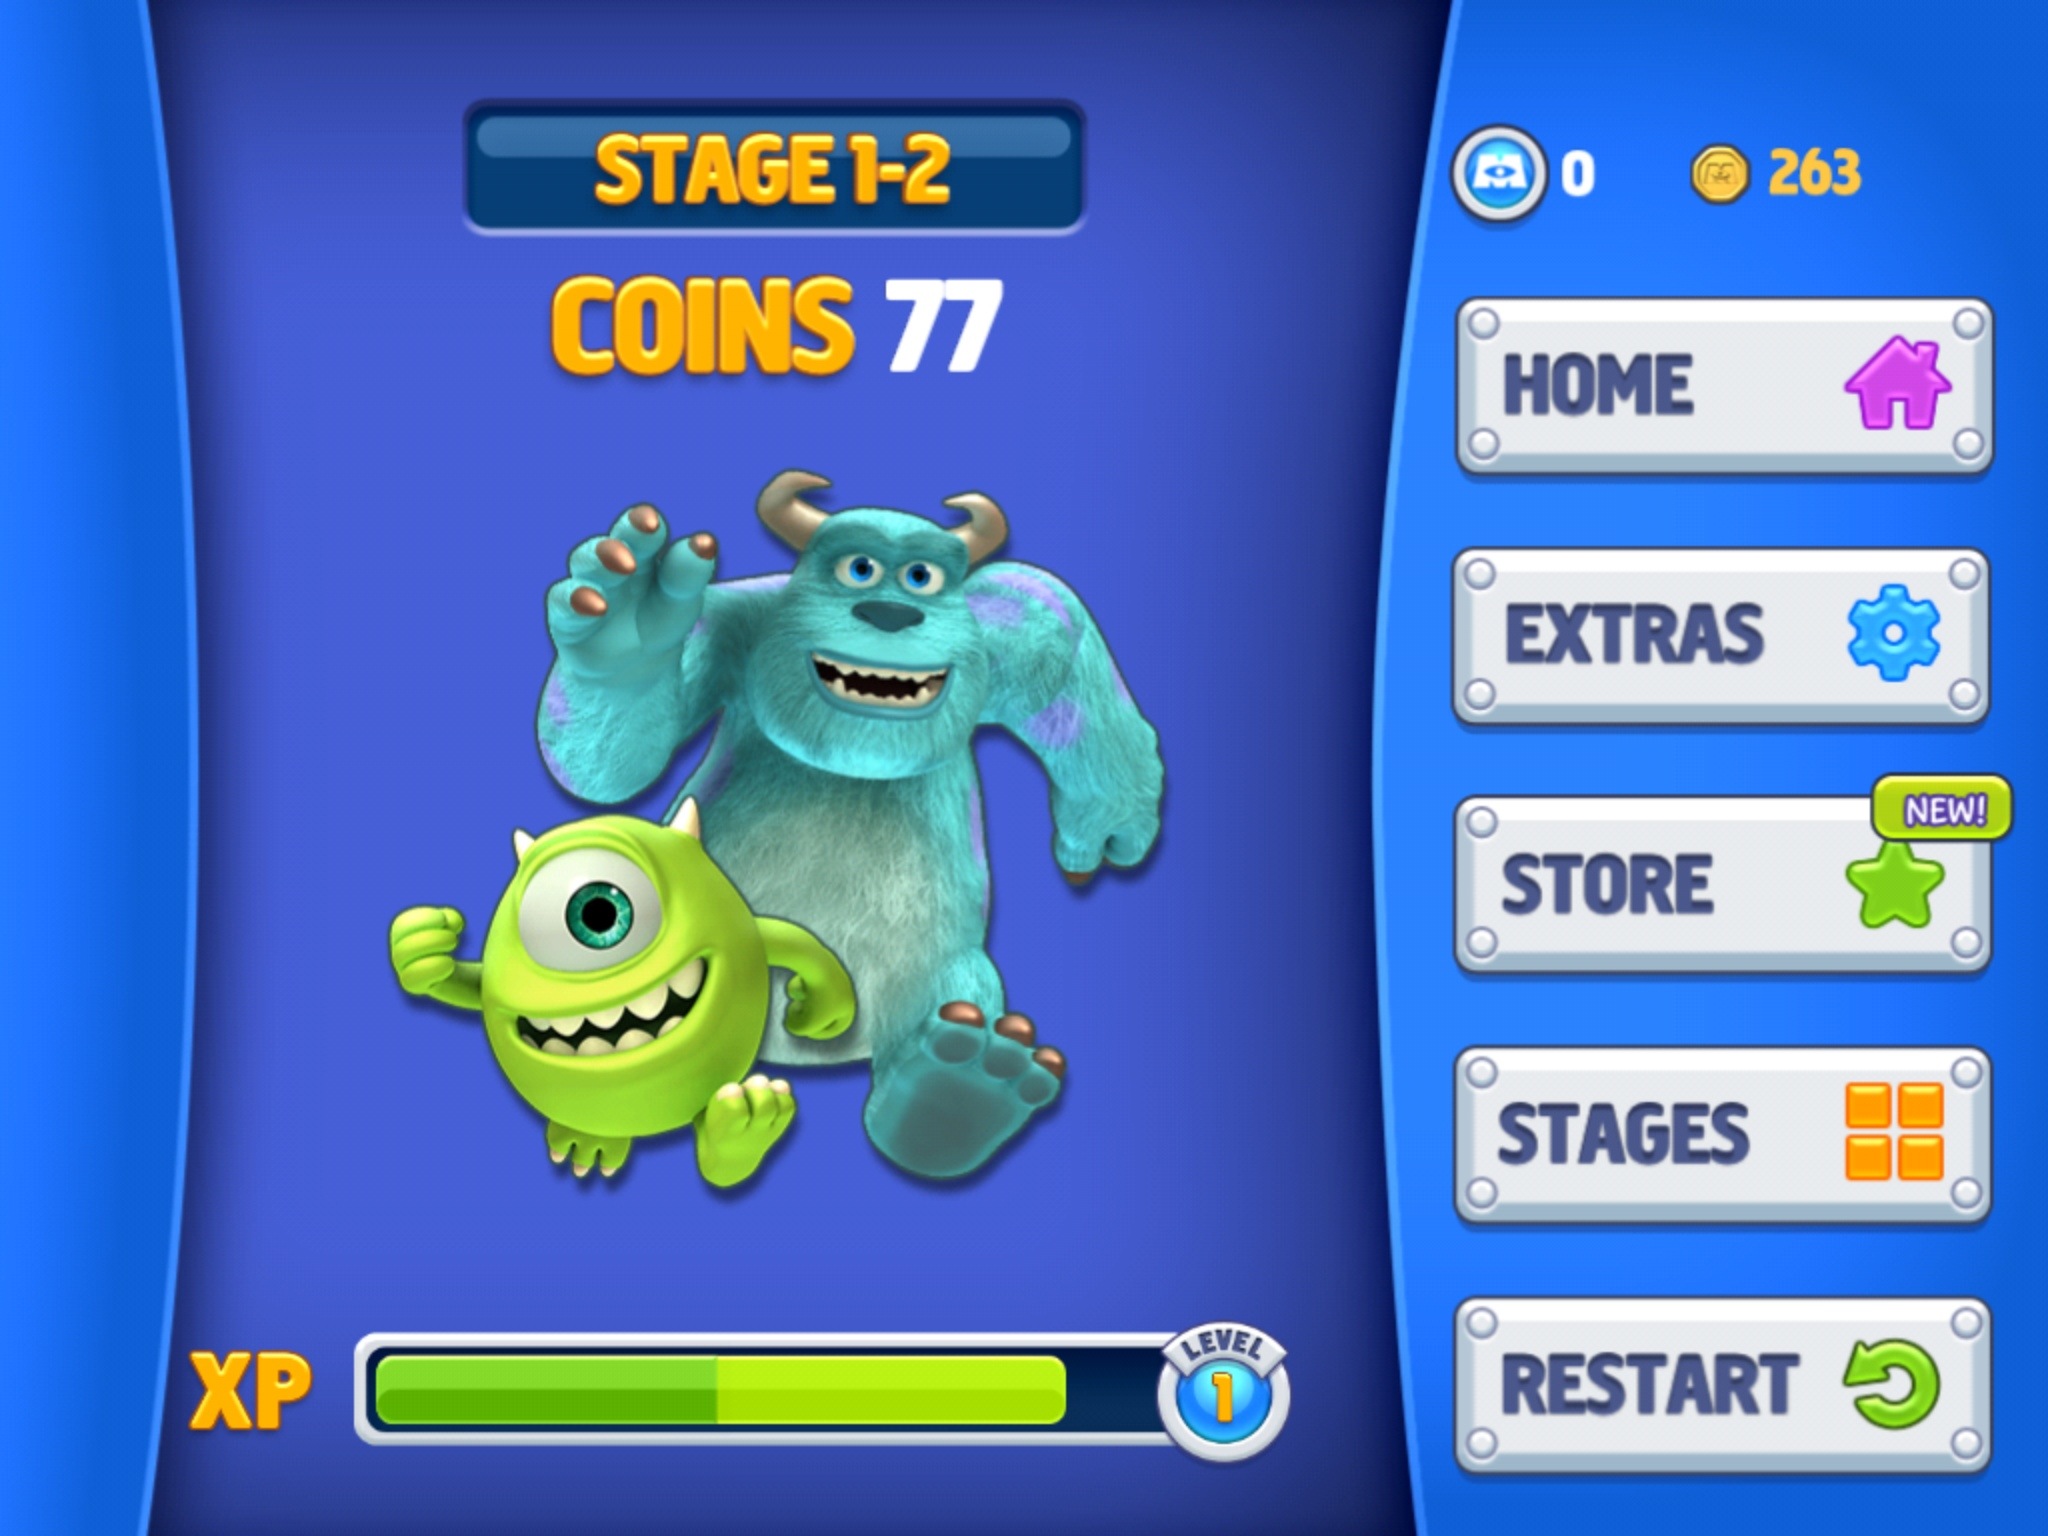 Monsters Inc. Run upgrade your profile